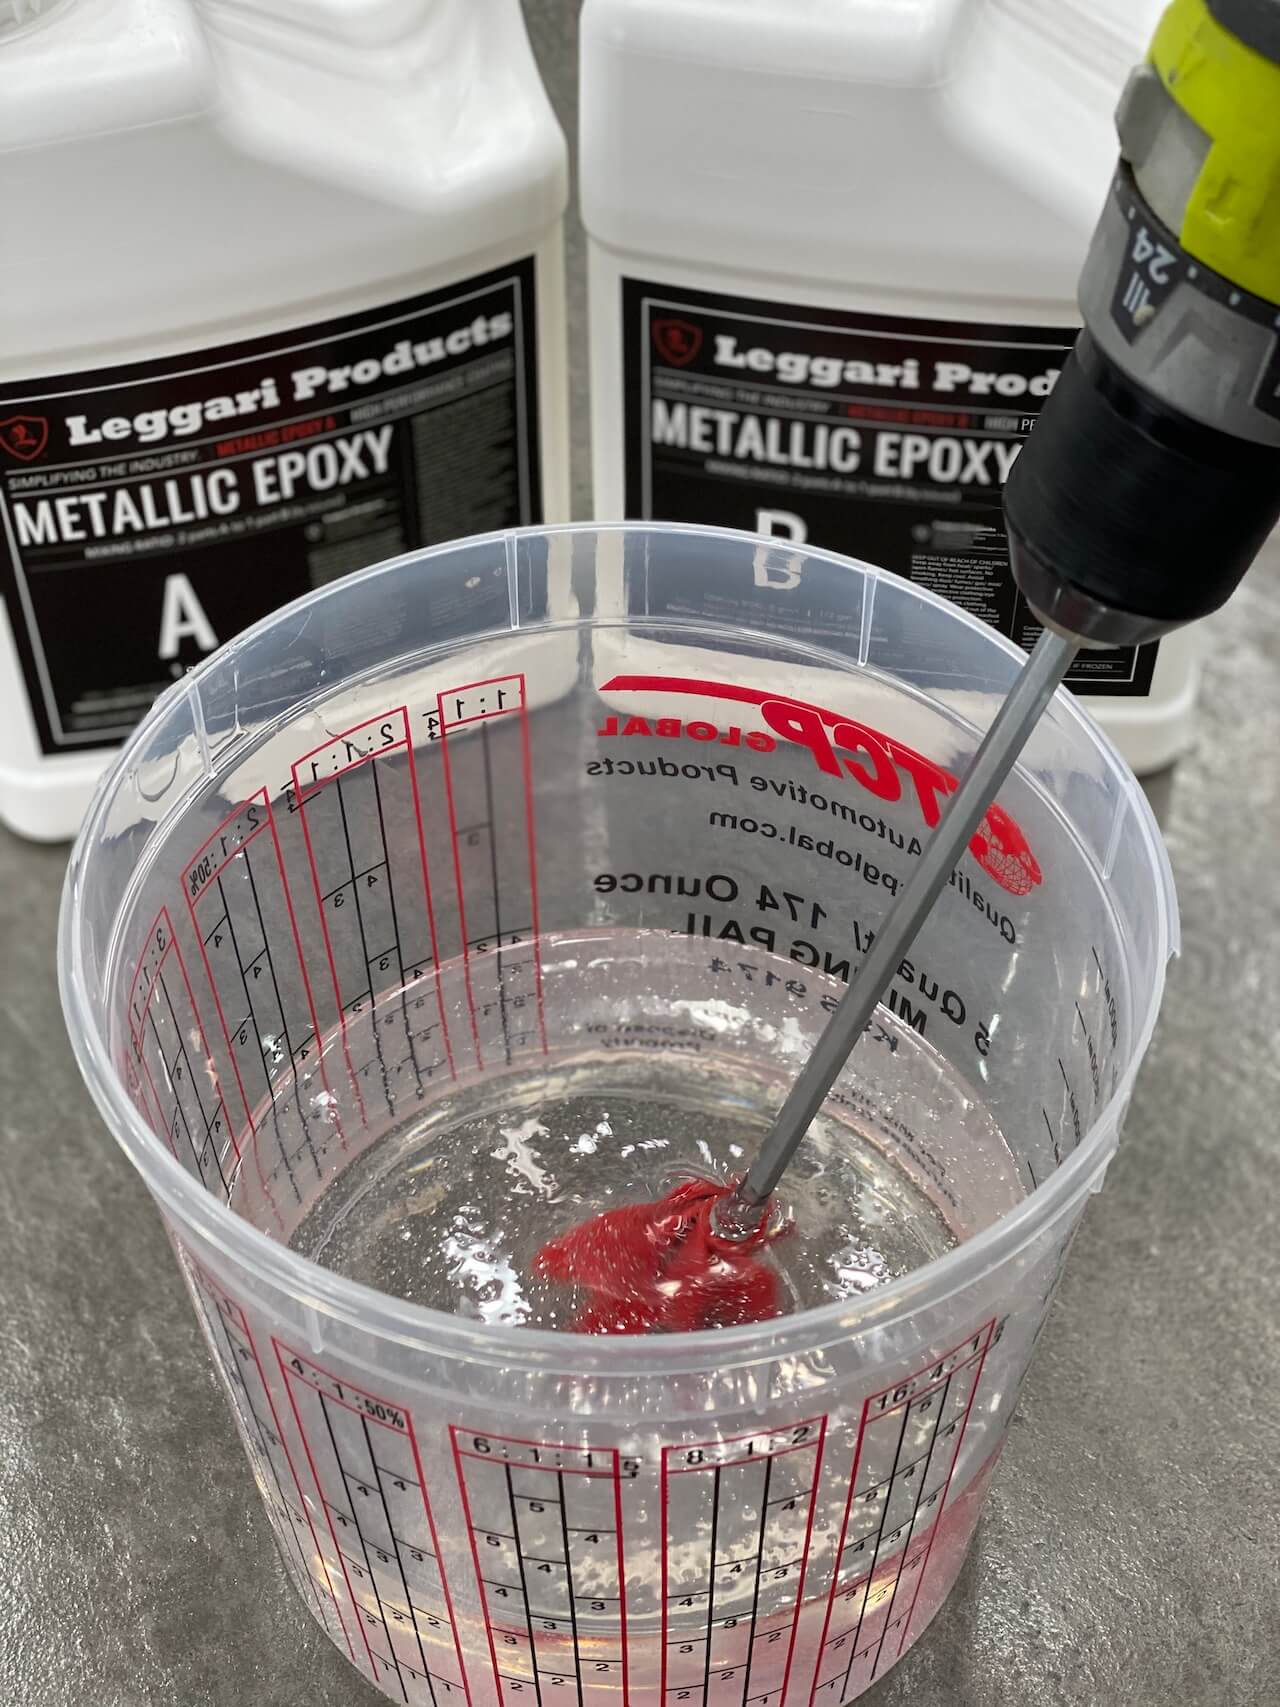 Mixing Leggari Products' Part A and Part B metallic epoxy.